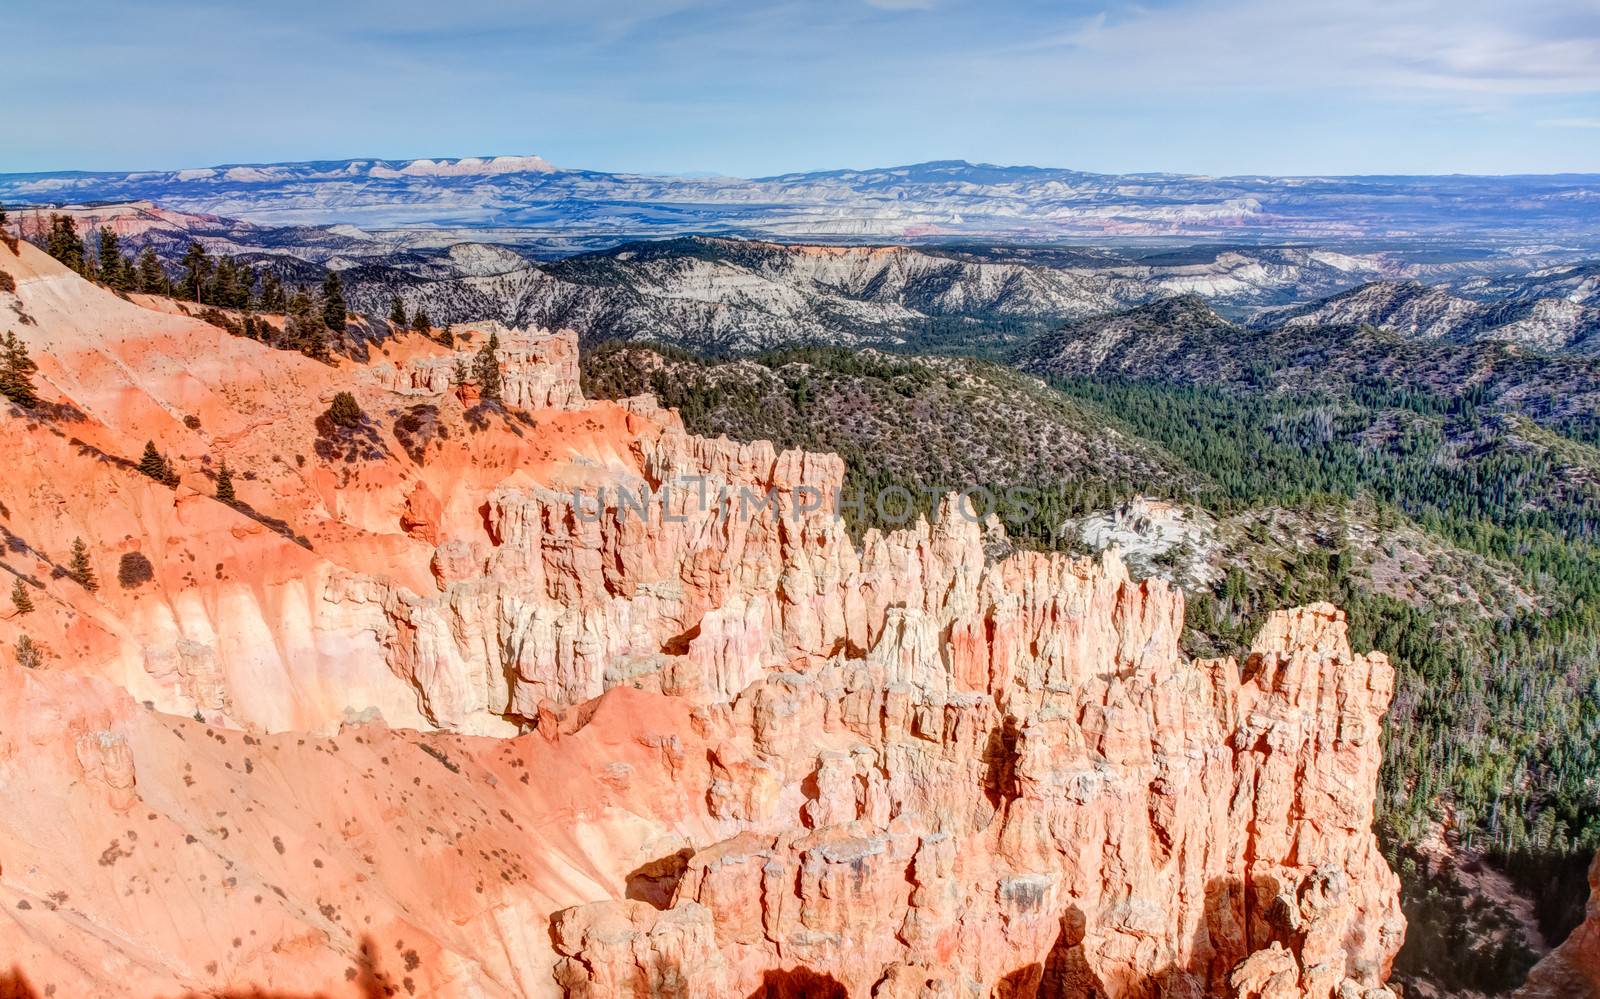 Ponderosa Point, at Bryce Canyon National Park, is one of the several natural amphitheaters carved out of eastern edge of the Paunsaugunt Plateau. The striking red colors against the green valley and mountainous backdrop combine for an exciting image.